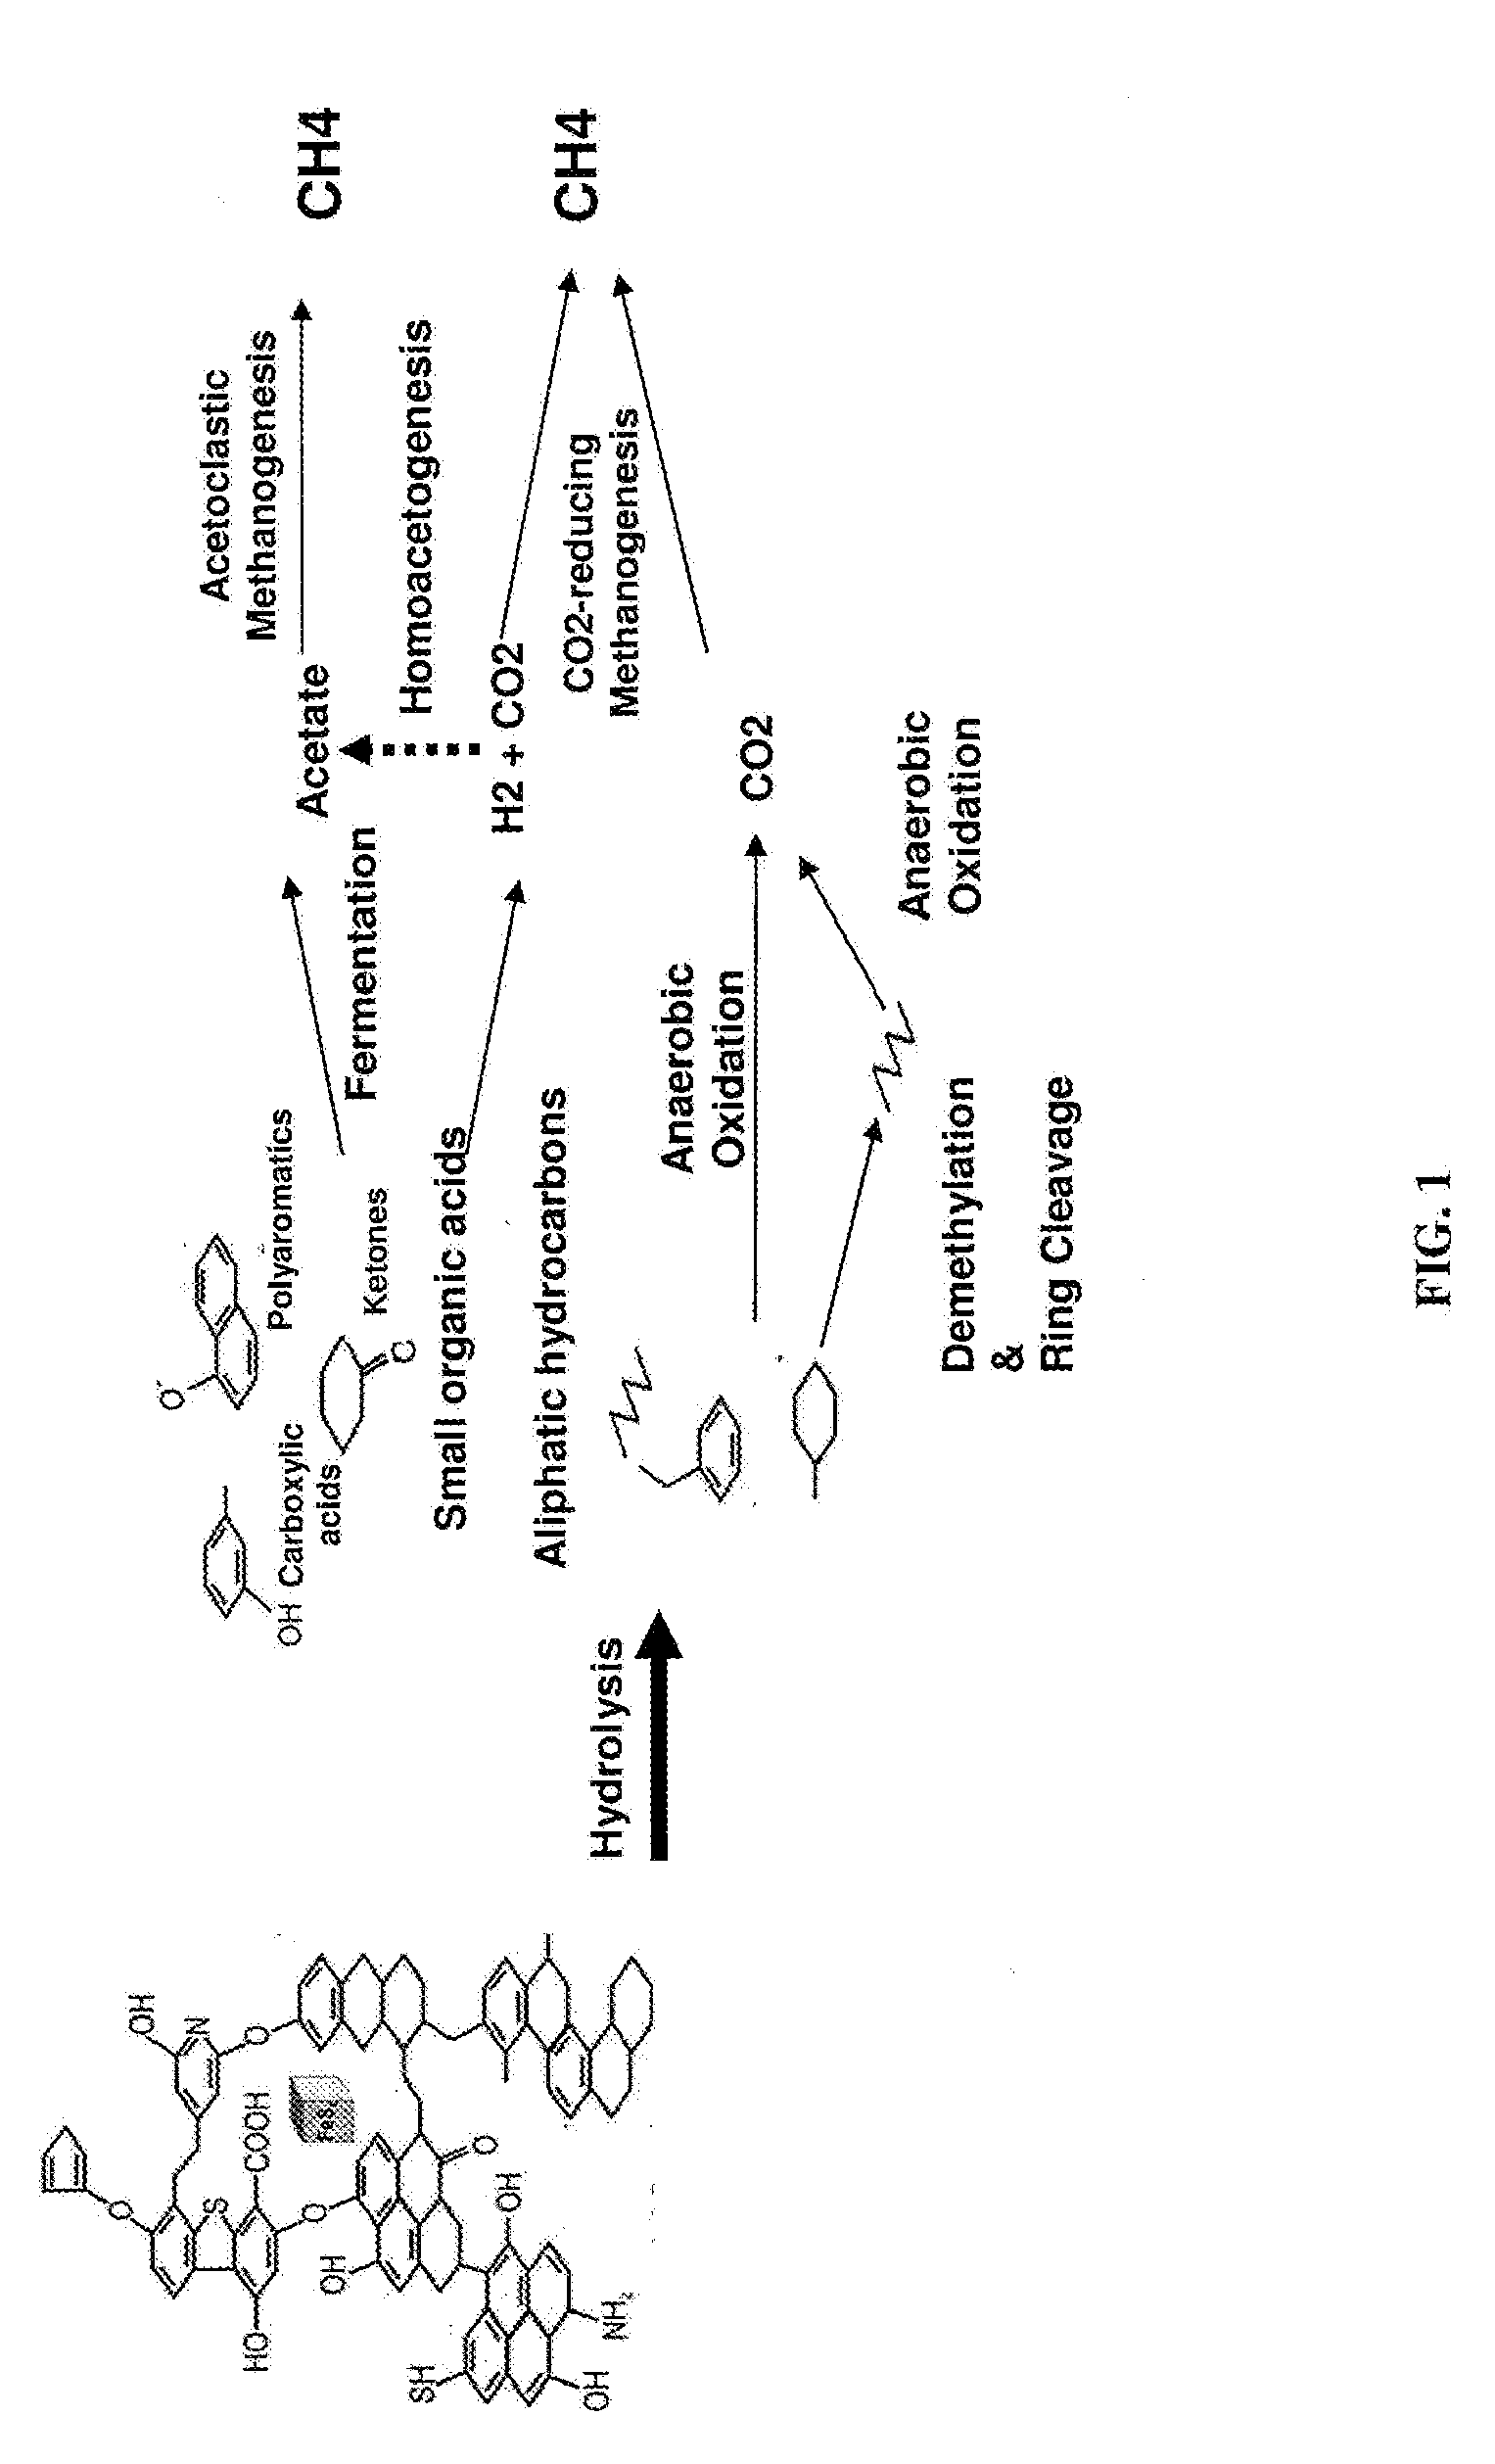 Methods to stimulate biogenic methane production from hydrocarbon-bearing formations